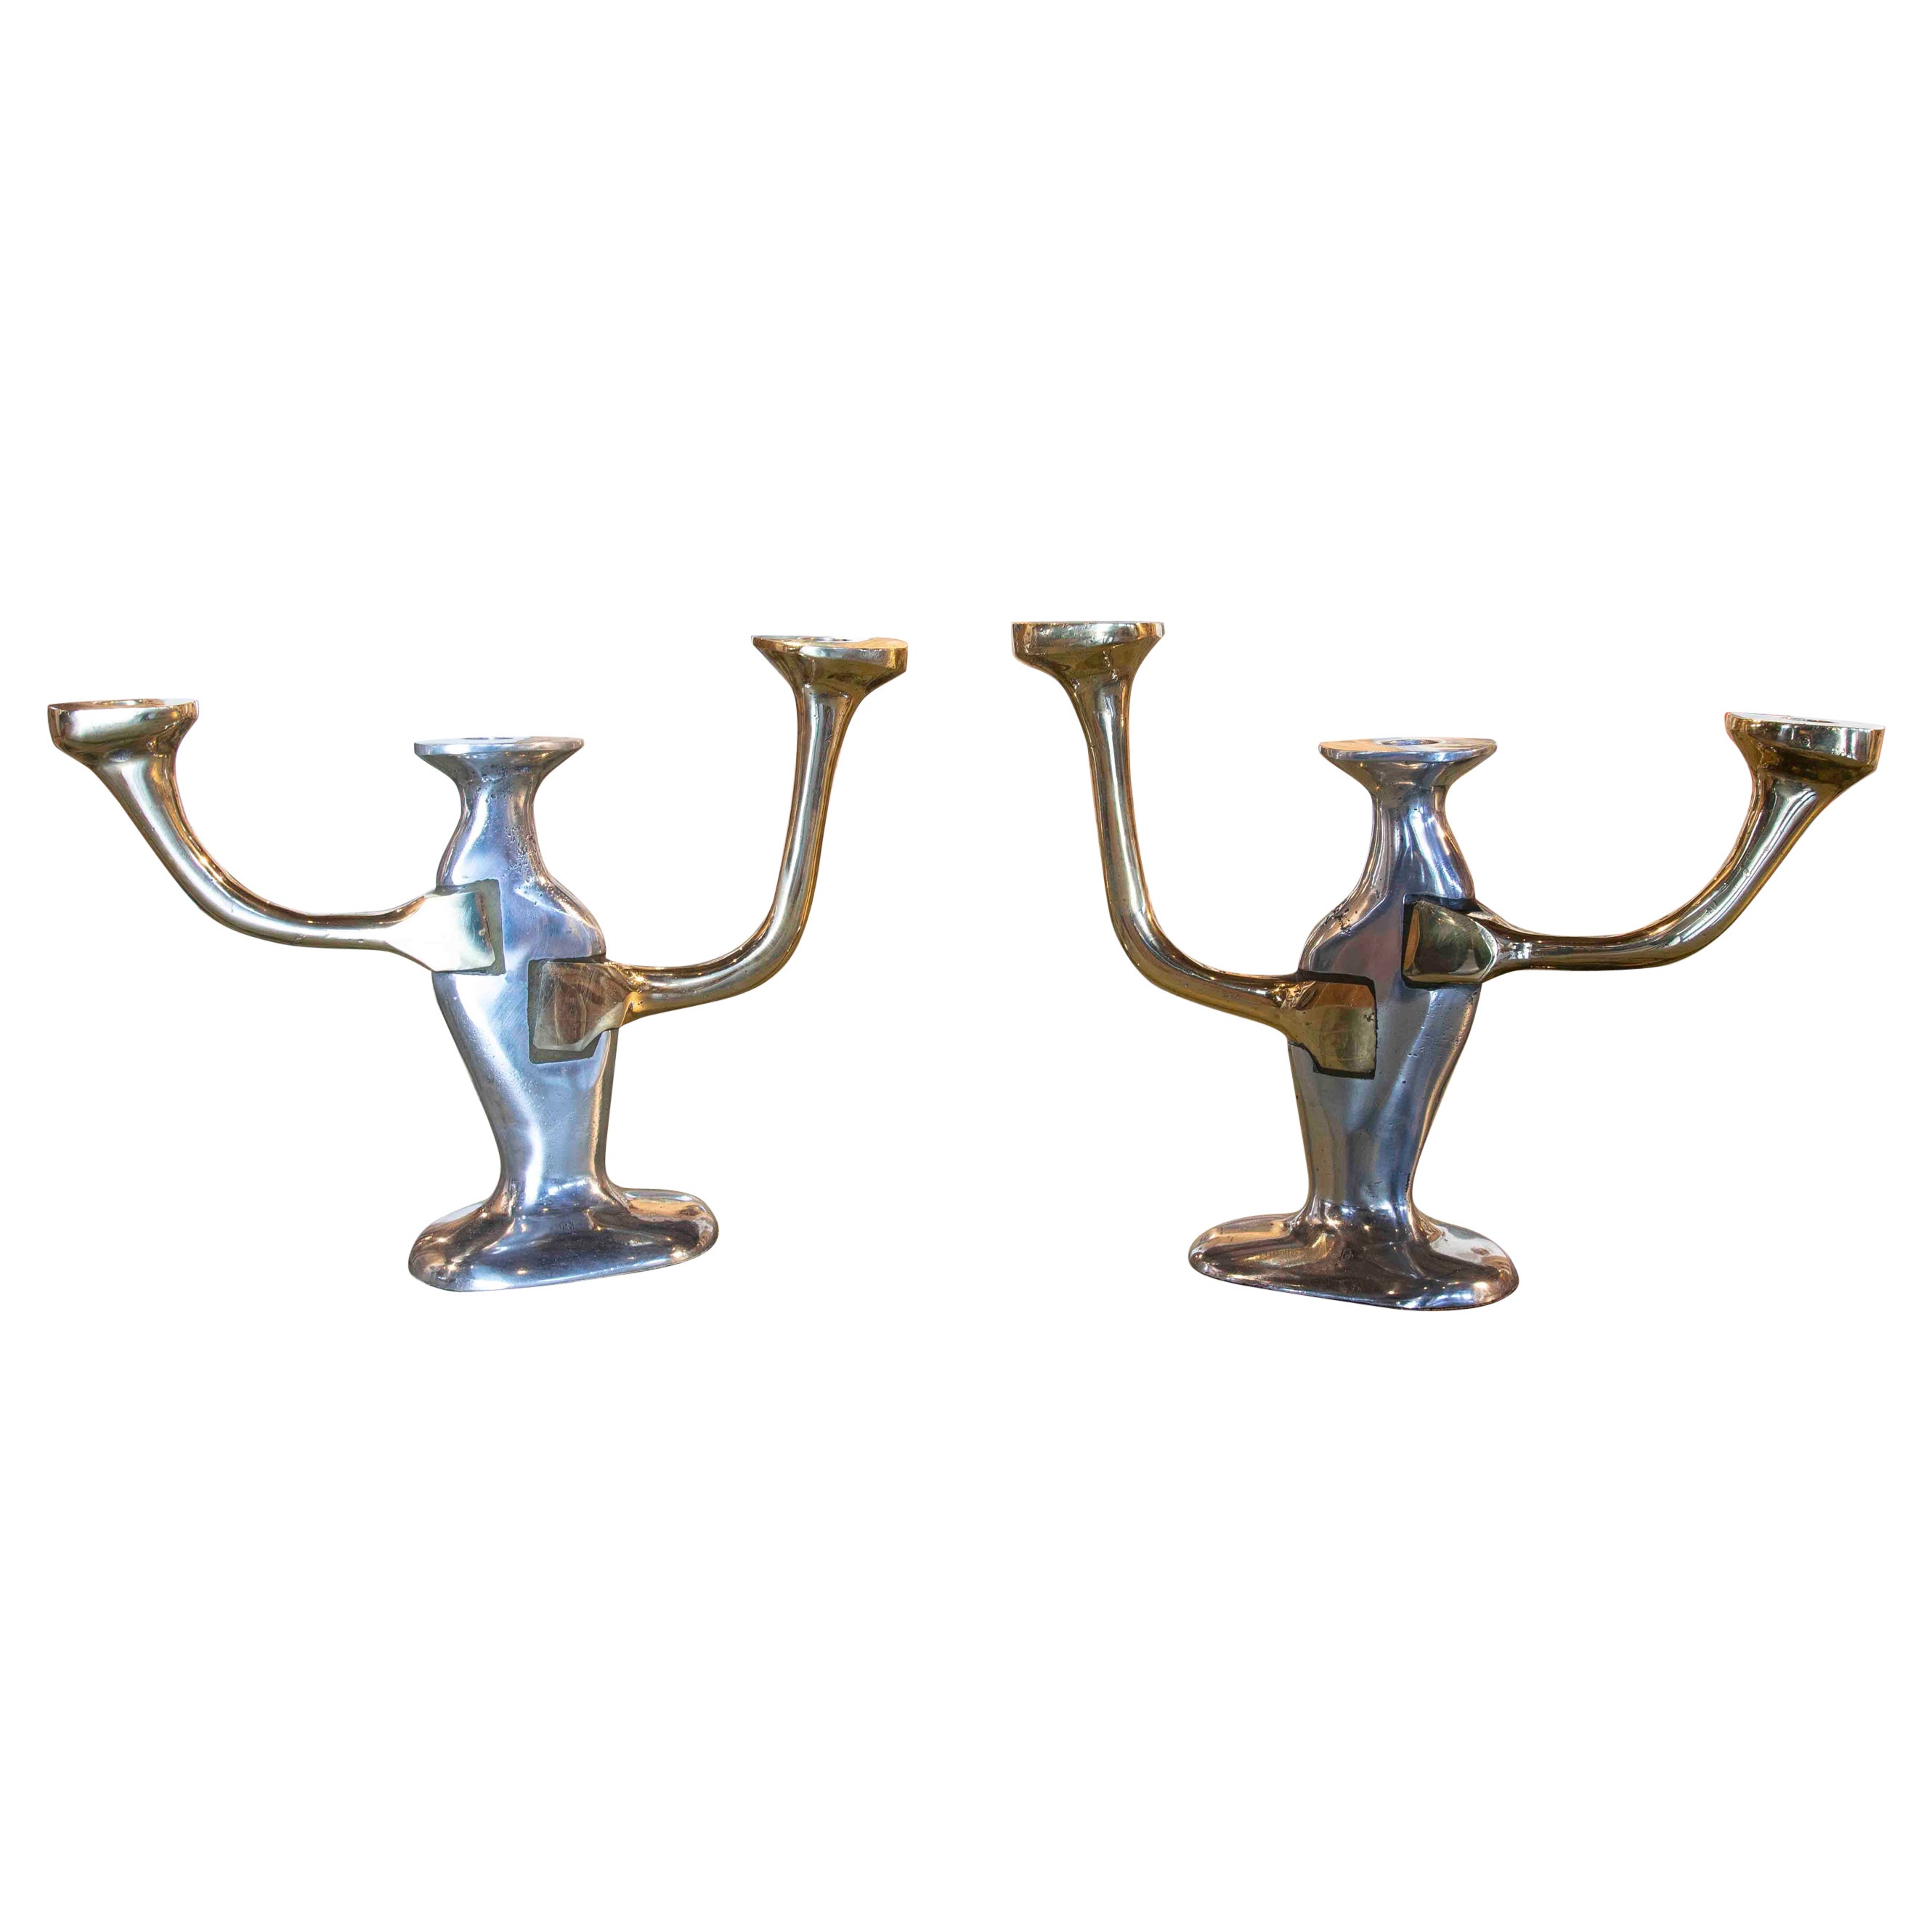 1980s Pair of Bronze Candlesticks by the Artist David Marshall For Sale